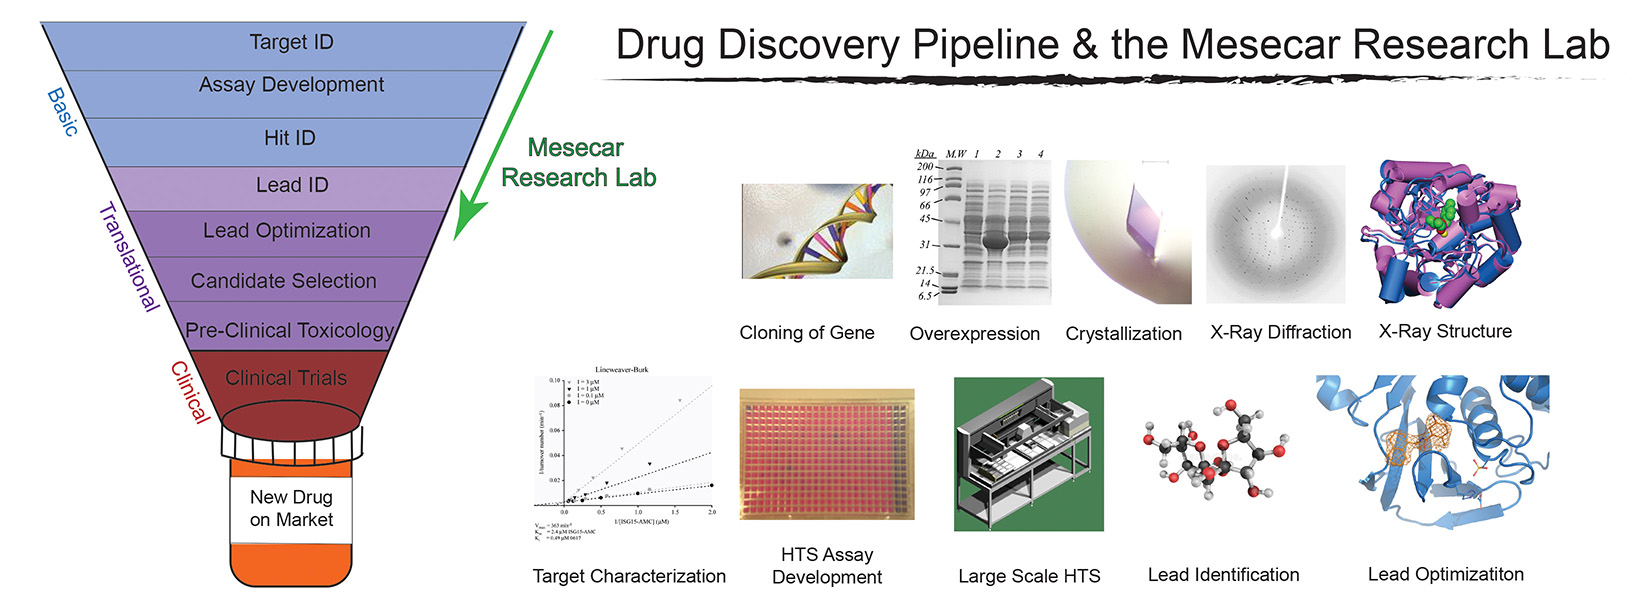 Drug Discovery Pipeline